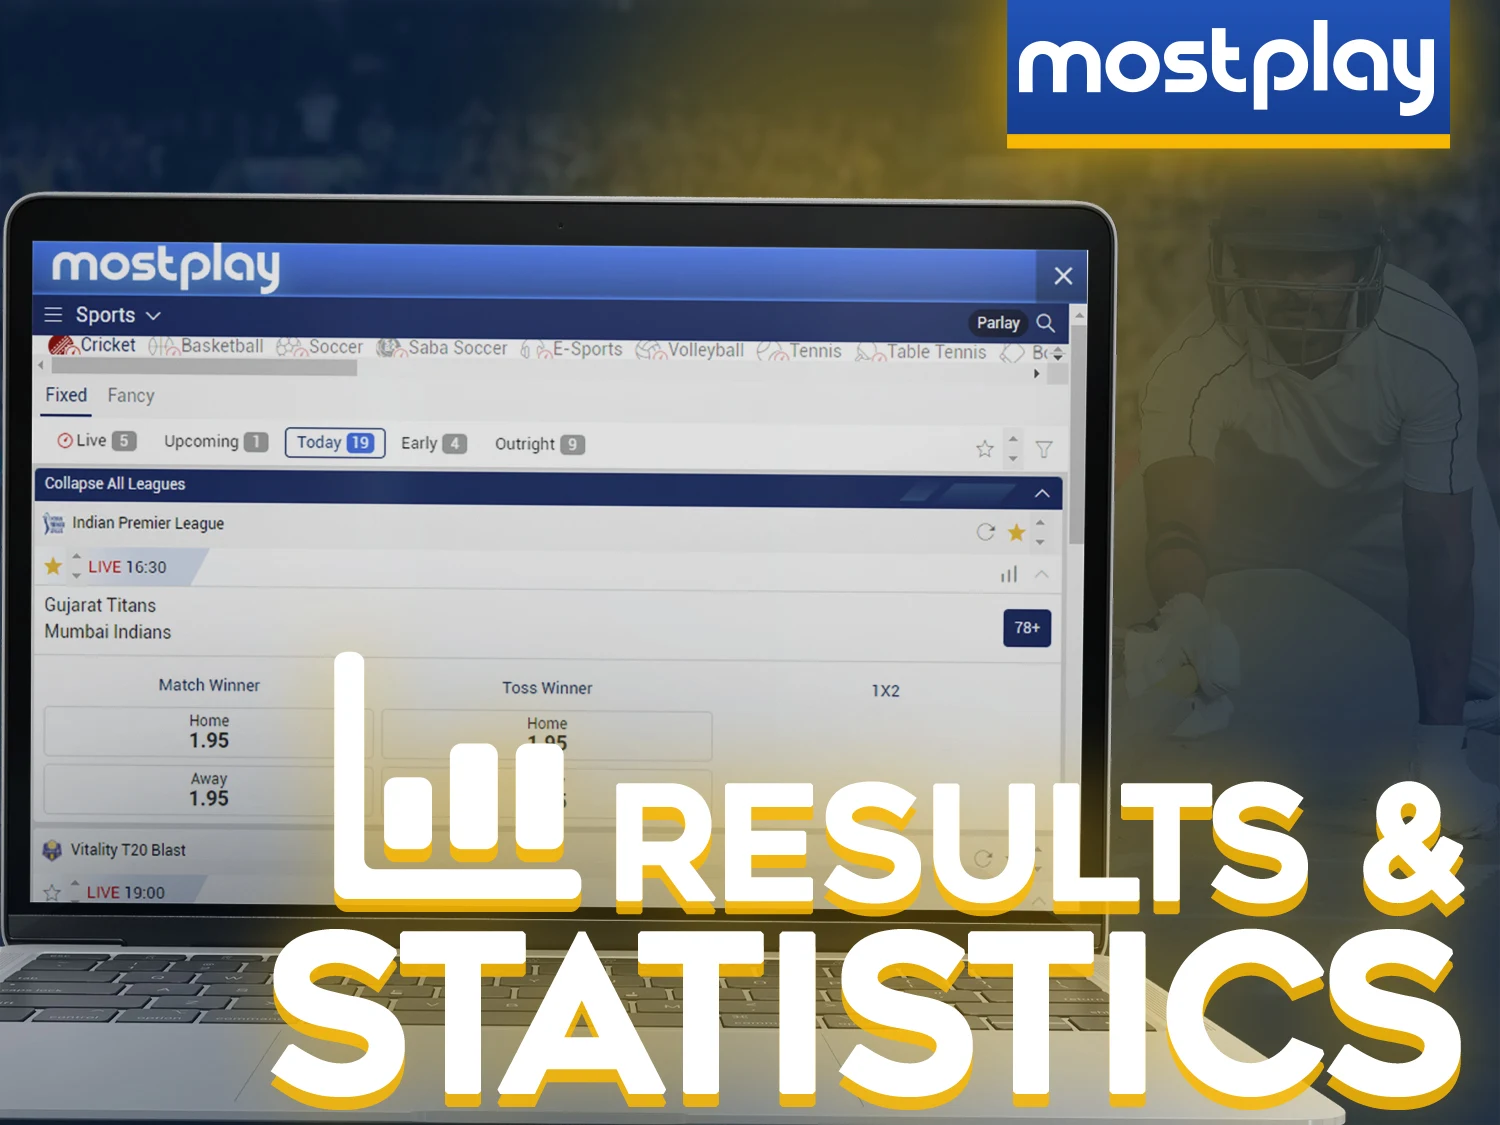 Check the results of previous games on the special Mostplay page.